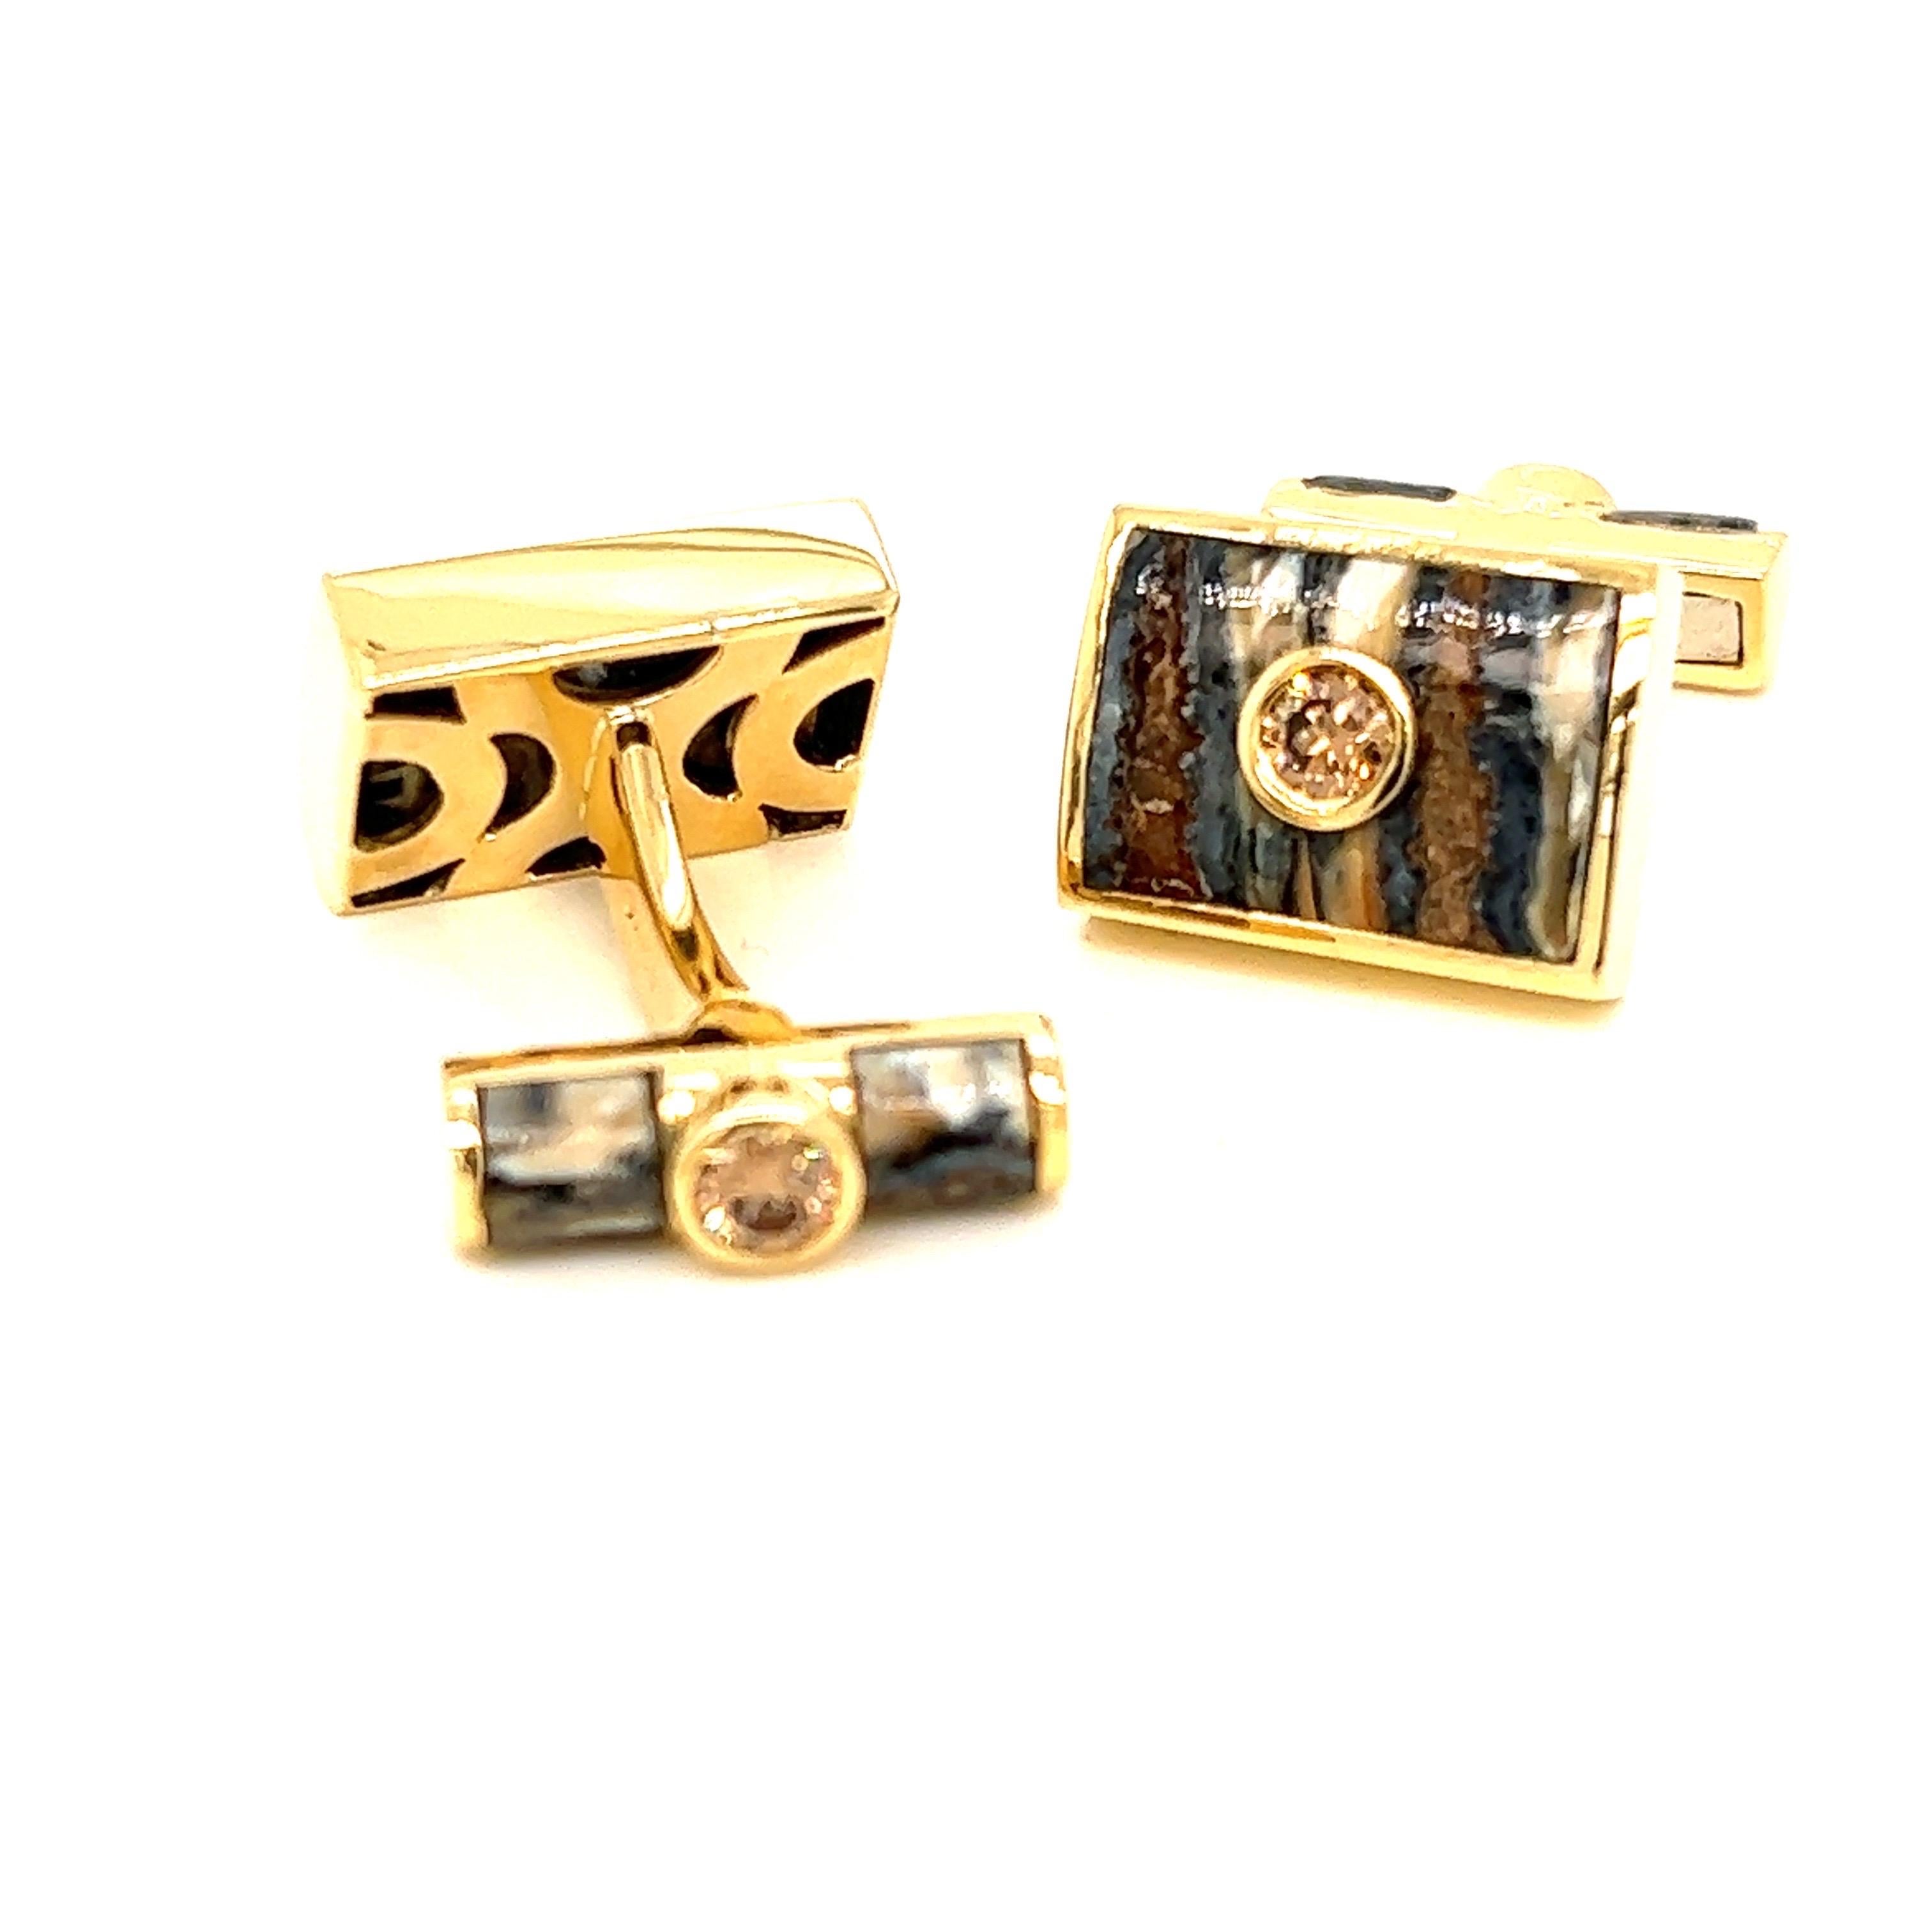 18k yellow gold cufflinks with fossilized mammoth tooth and 1.07tct of bronze diamonds. Swivel backing.

Approximate measurements: 
17mm x 12mm